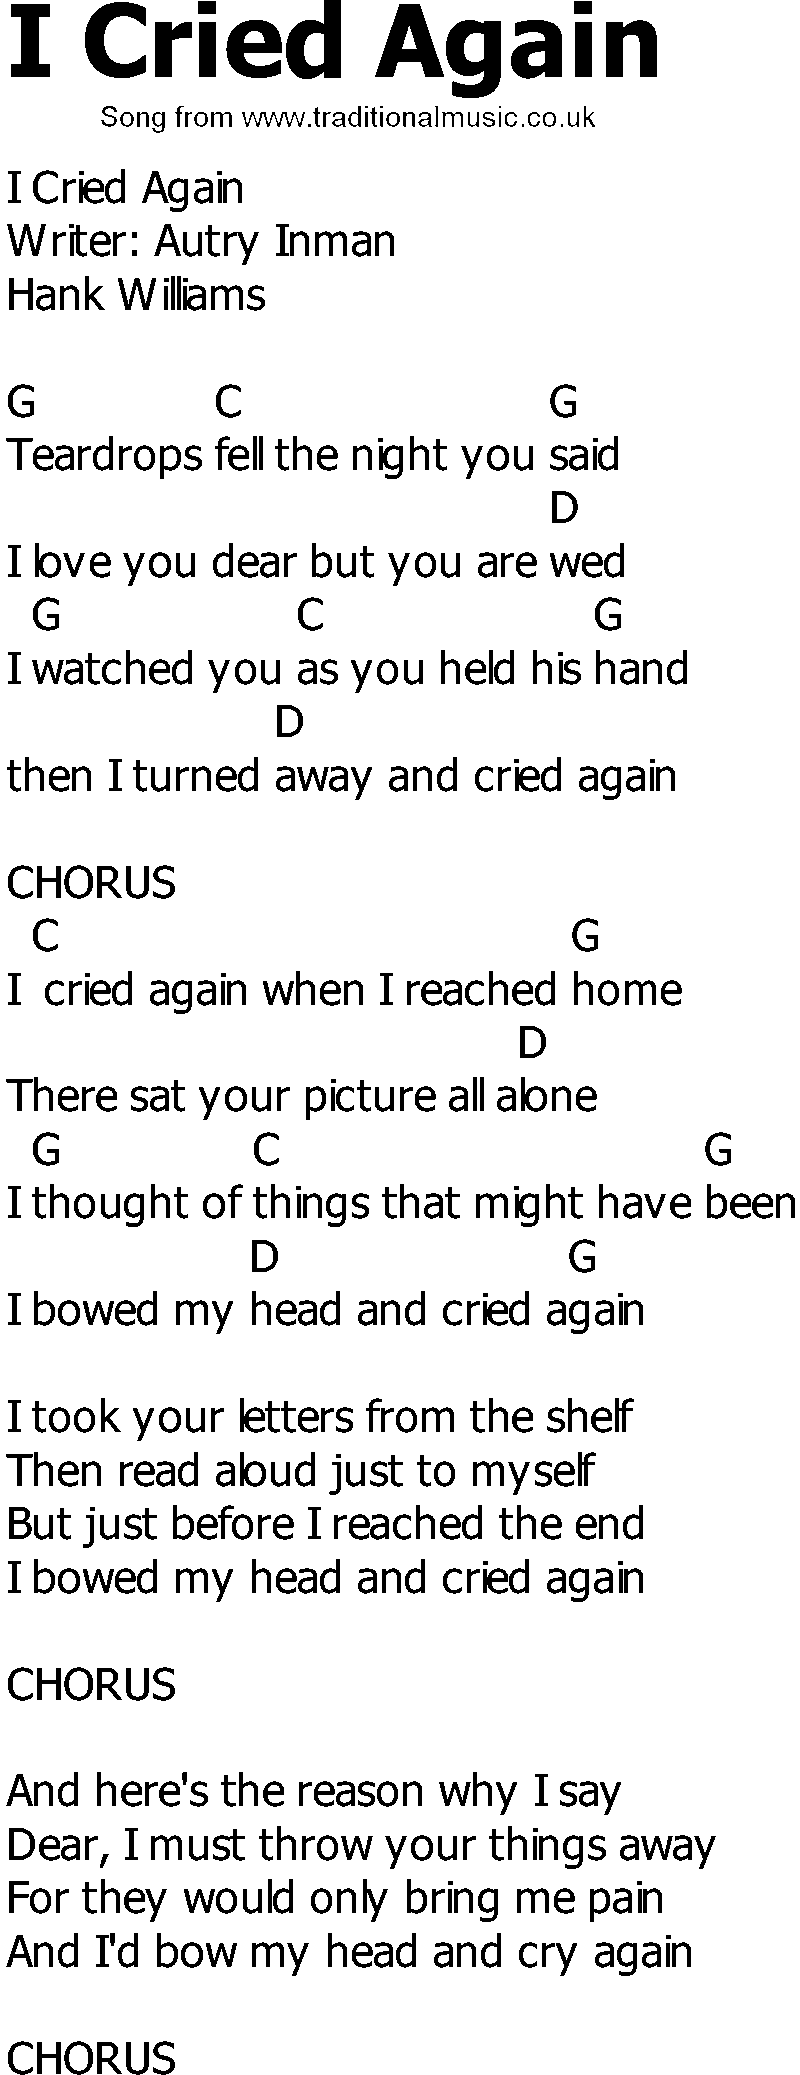 Old Country song lyrics with chords - I Cried Again